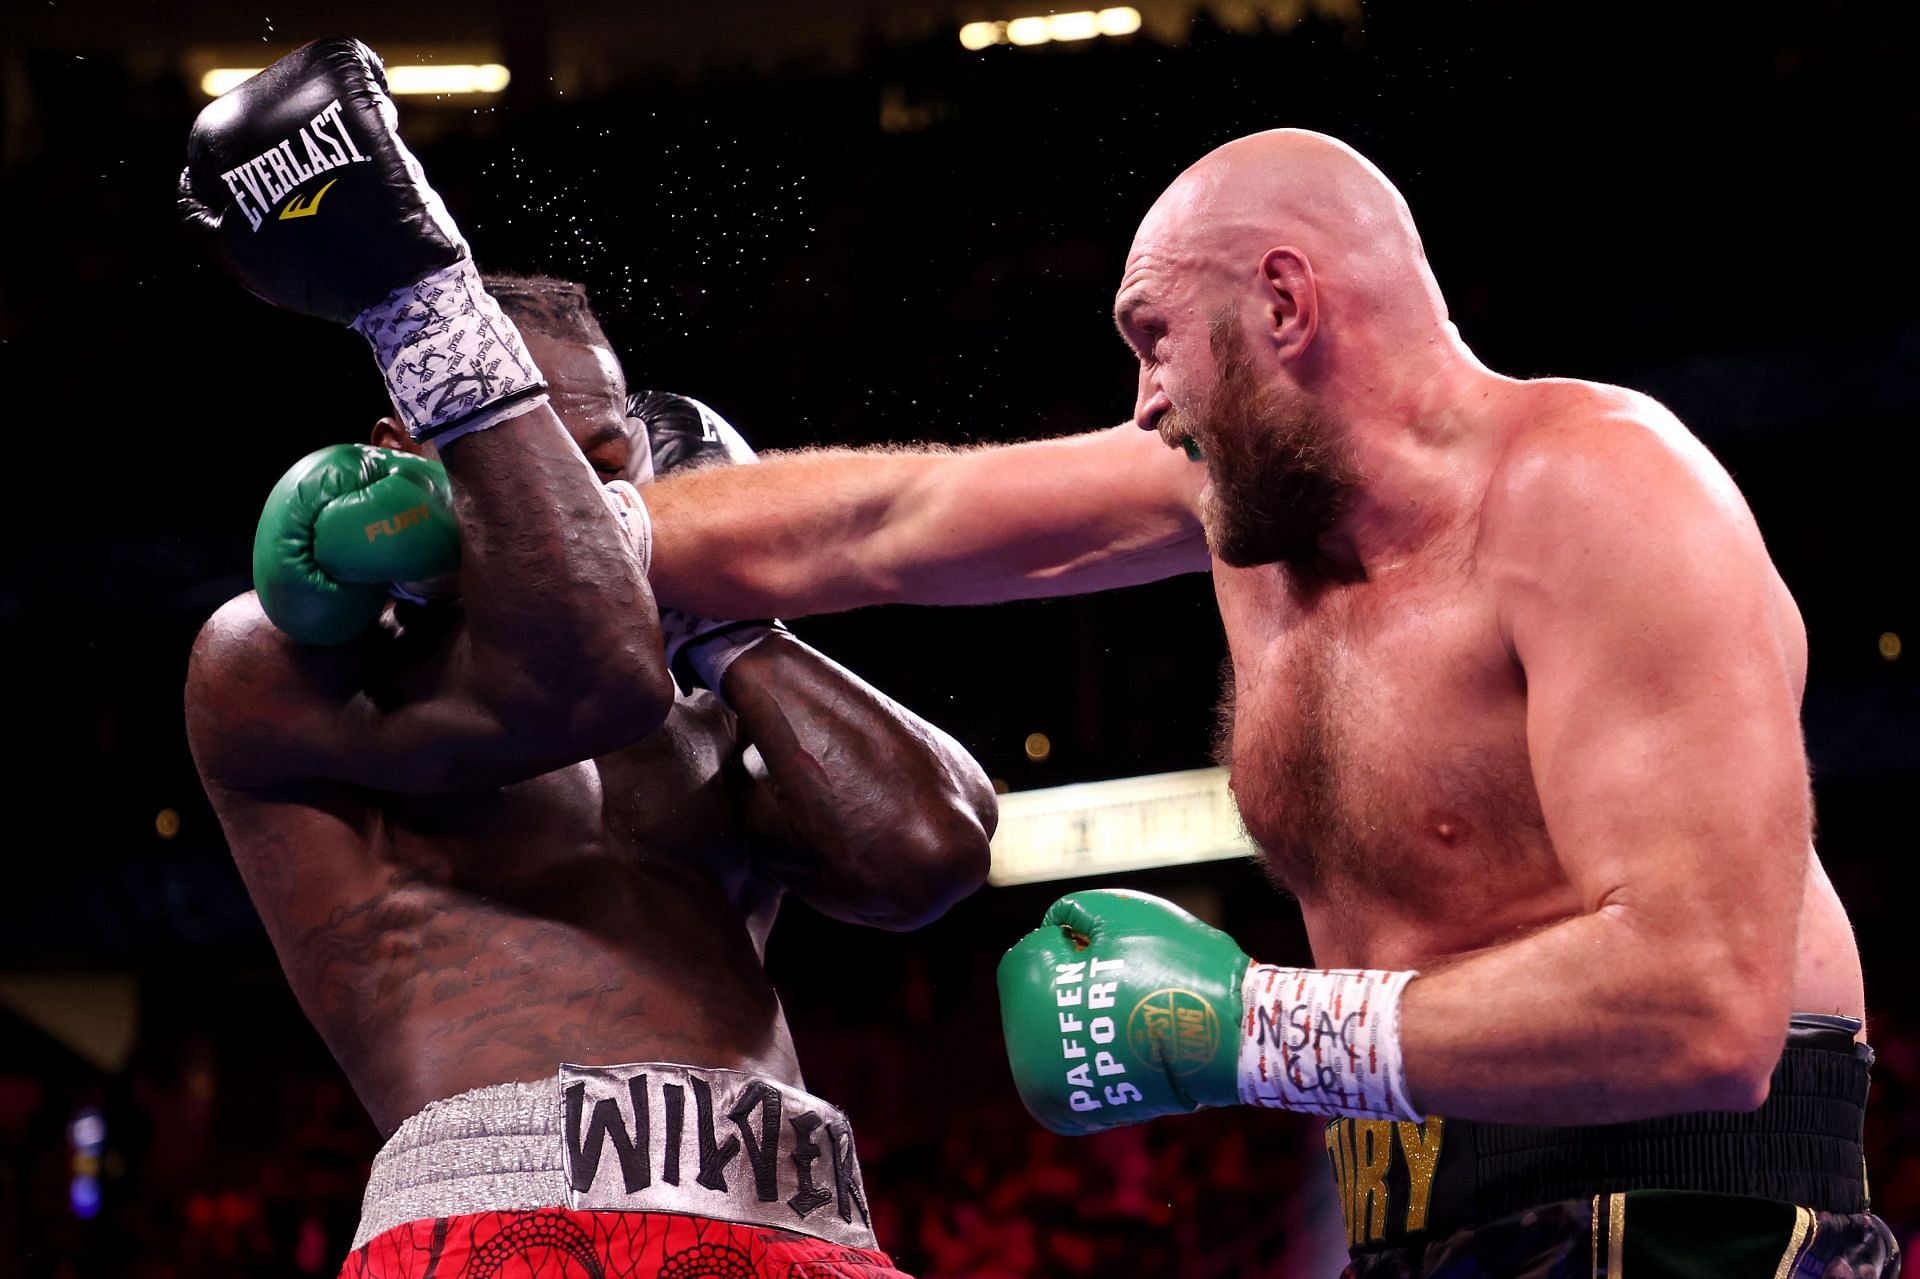 Tyson Fury v Deontay Wilder at a boxing event